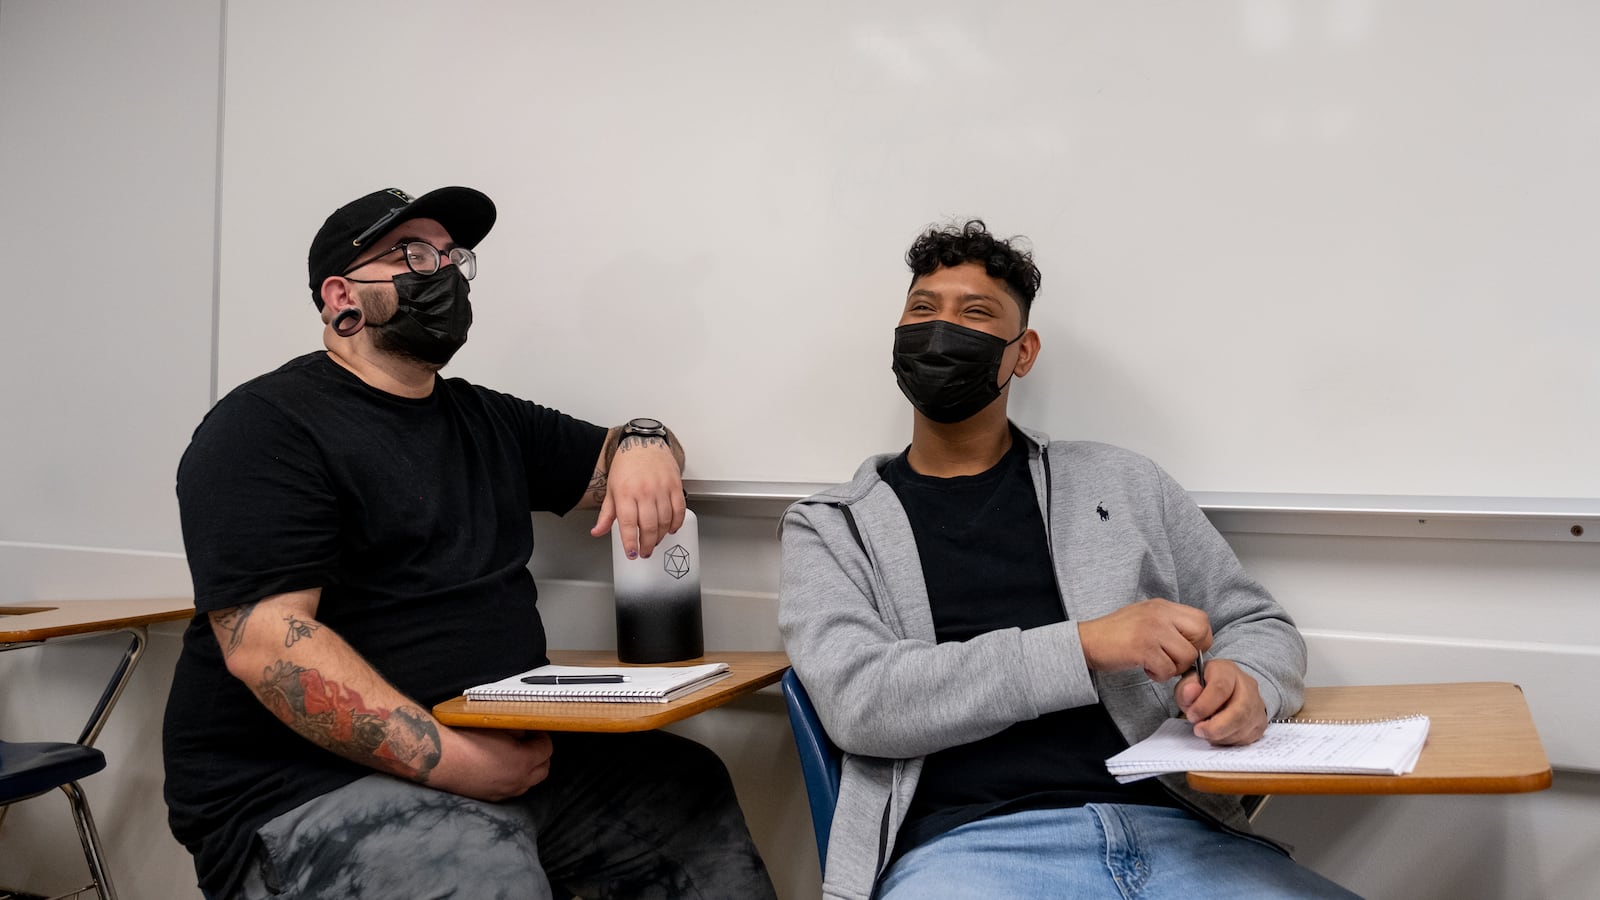 Two male students share a laugh together while sitting at their desks next to a white board. The student on the left is wearing a black hat and shirt, while the student on the right is wearing a grey hooded sweatshirt. They are both wearing black protective masks.